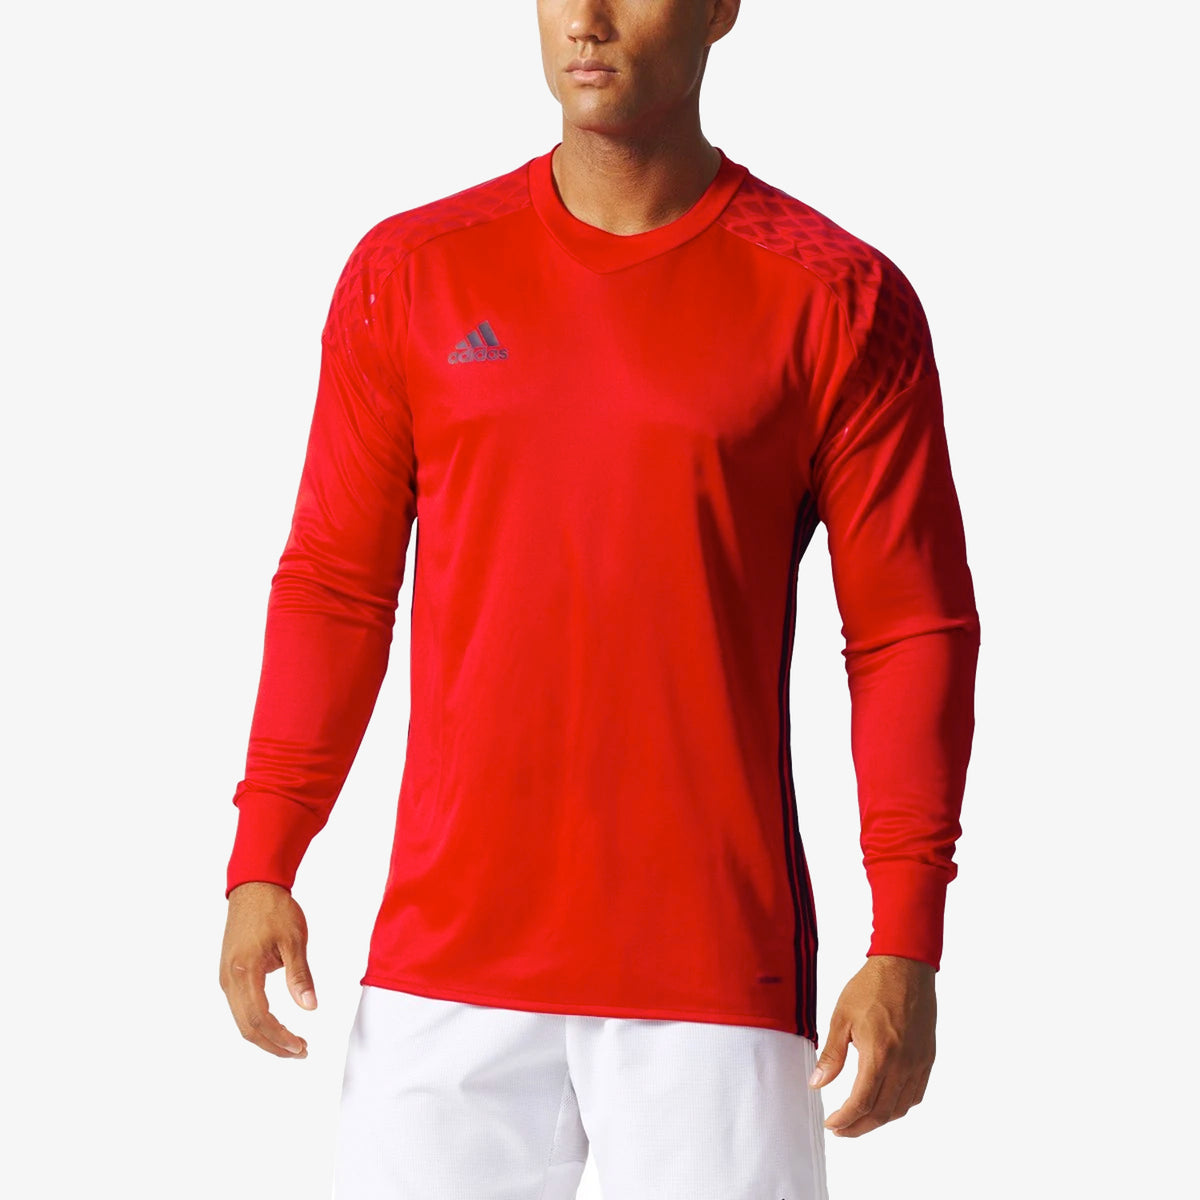 Onore 16 Goalkeeper Soccer Jersey Men's - Niky's Sports